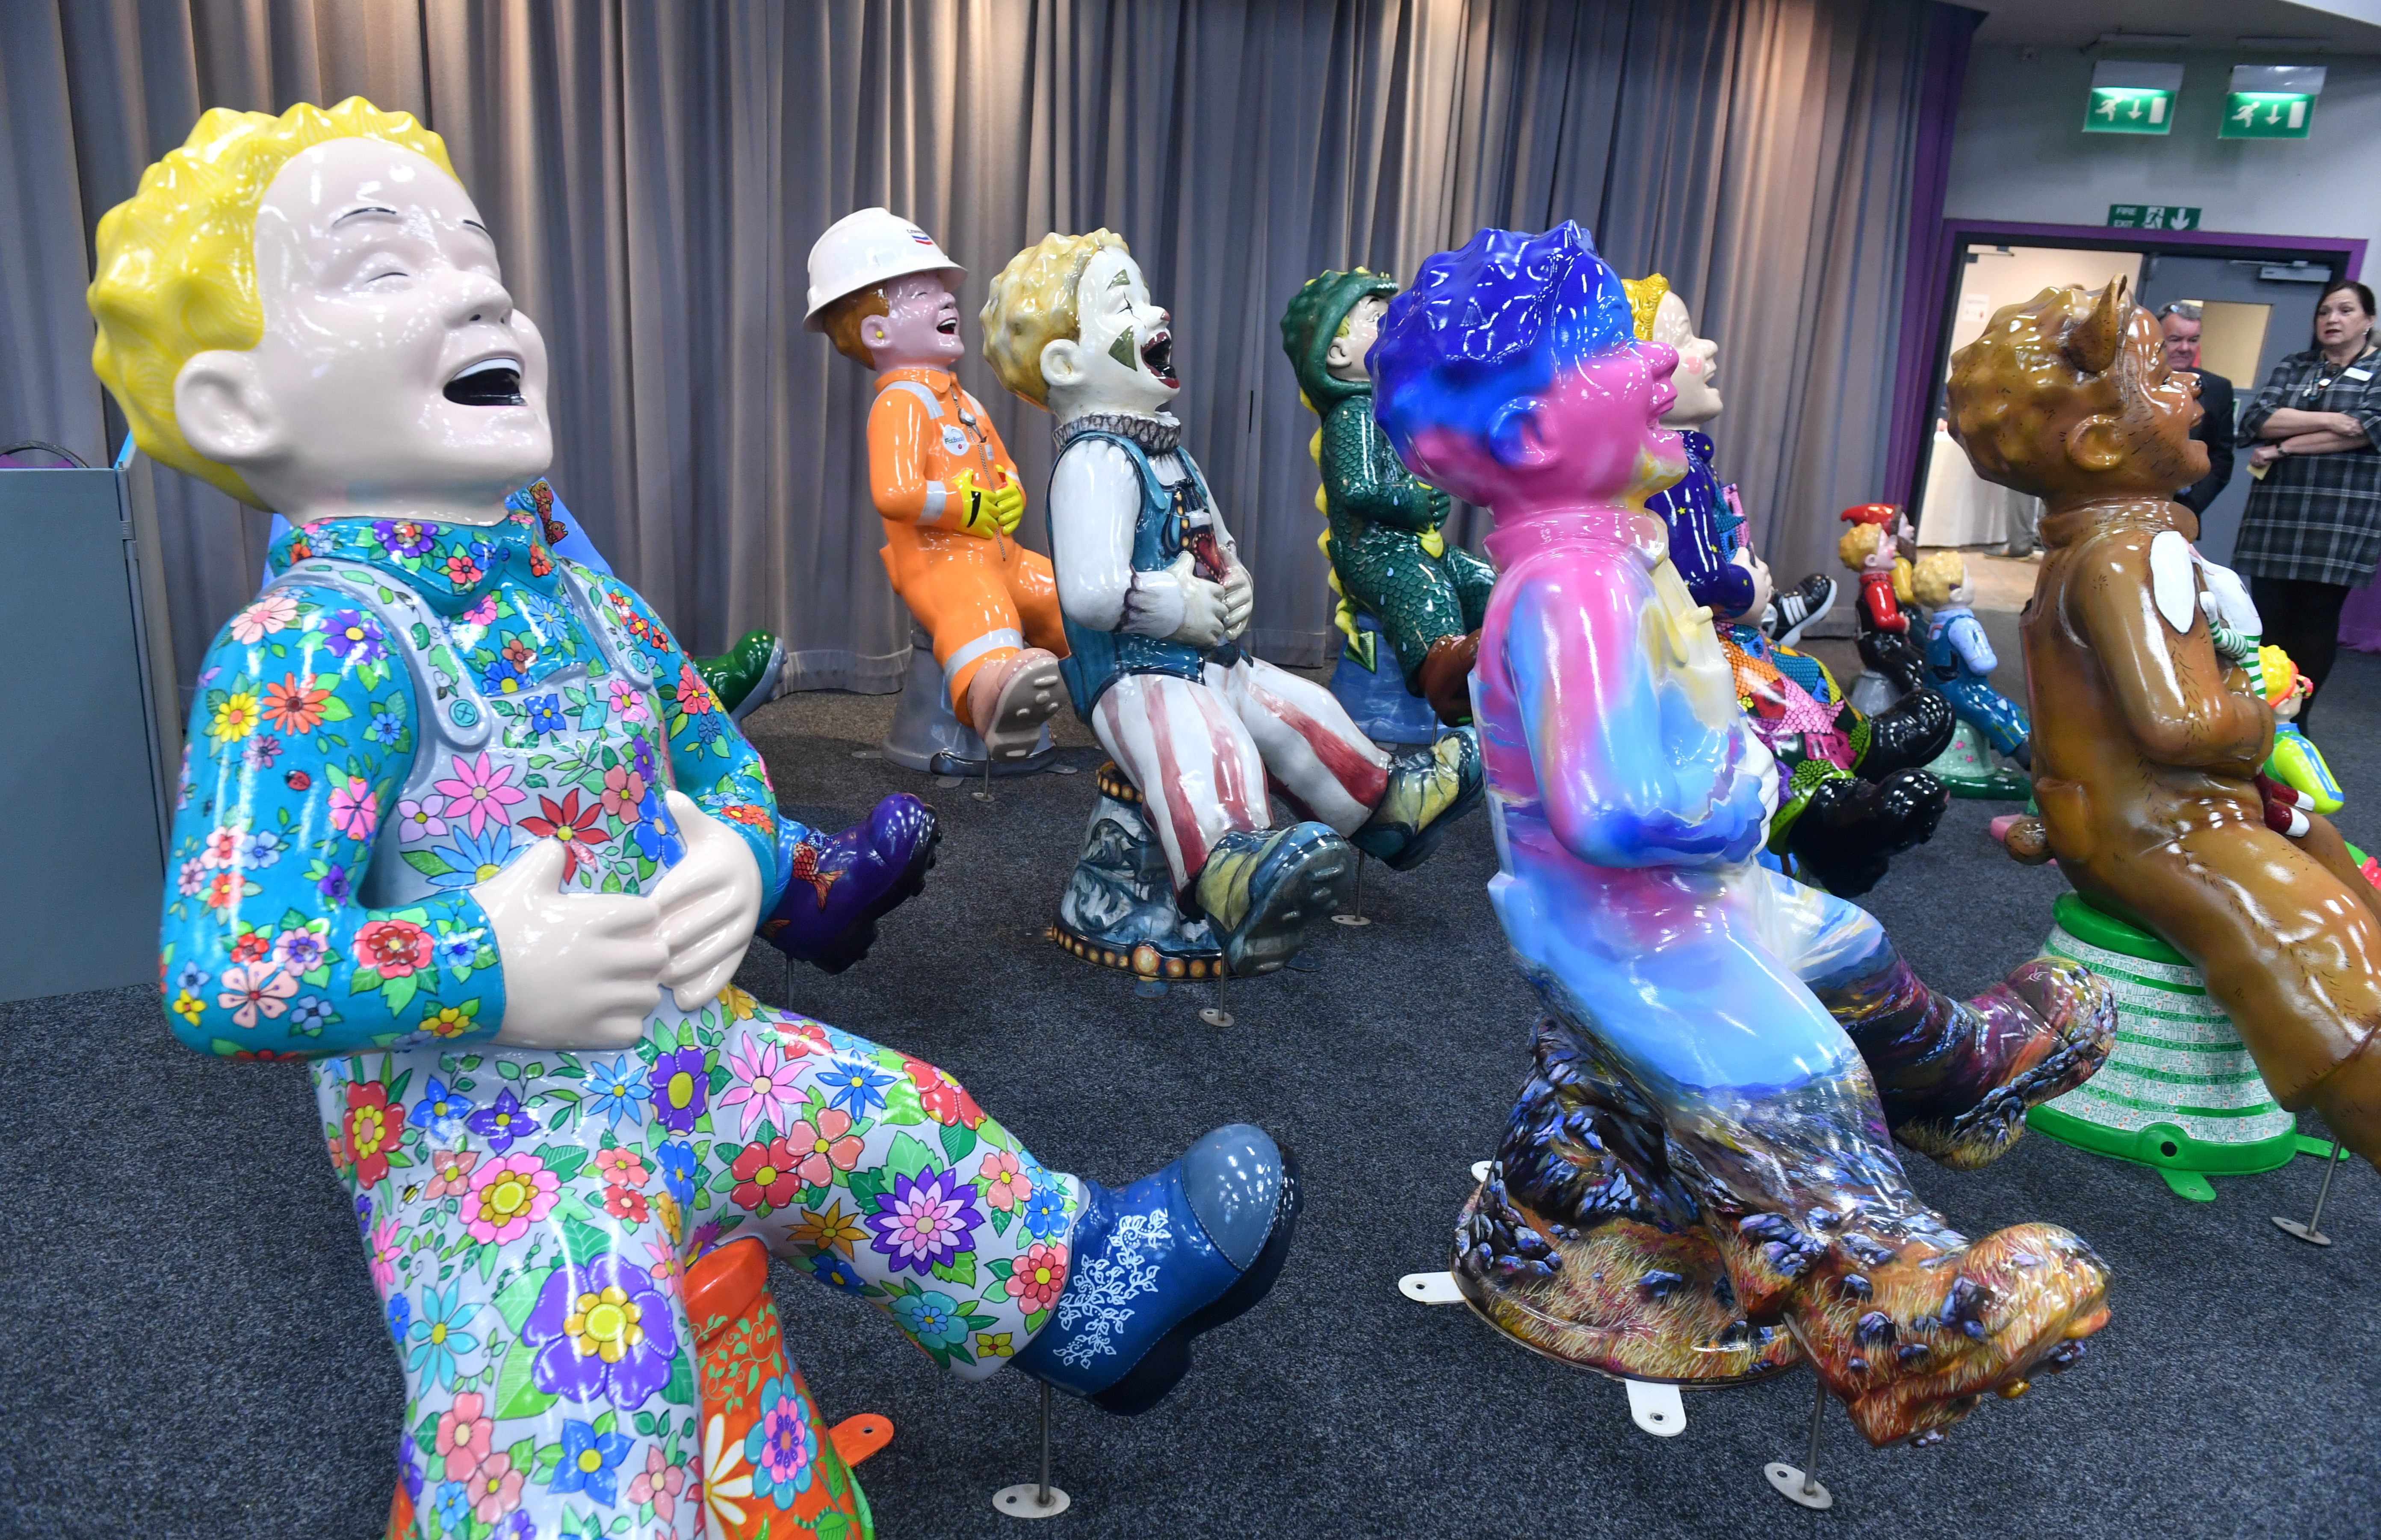 Oor Wullie statues patiently waiting in the wings ahead of their auction at Thainstone in Inverurie on Tuesday night.